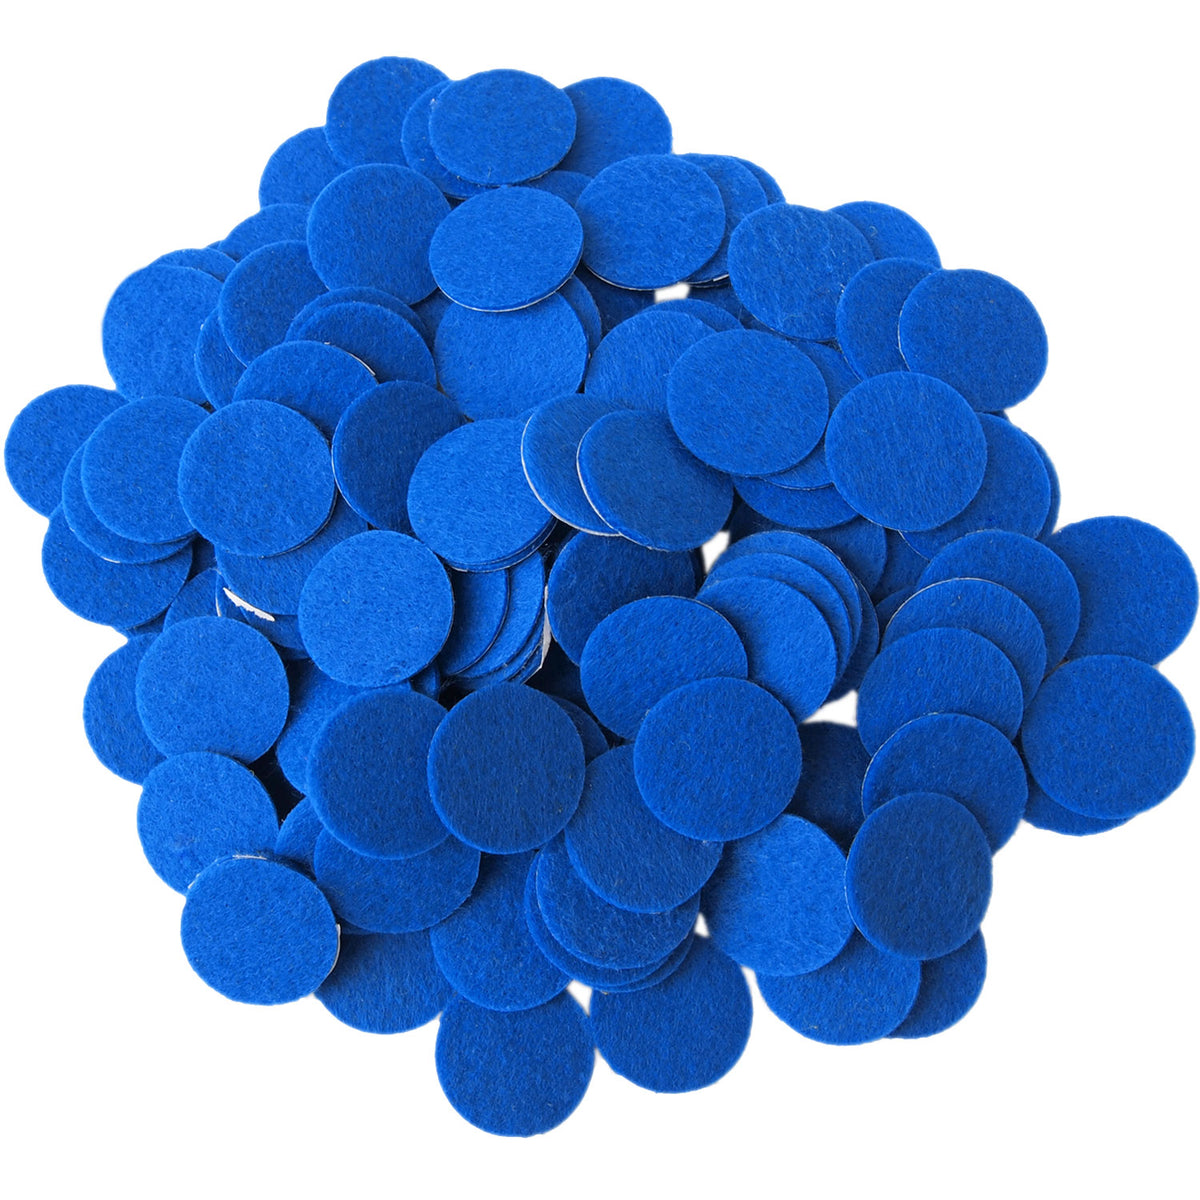 Neon Blue Felt Circles (3/4 to 5 inch) – Playfully Ever After